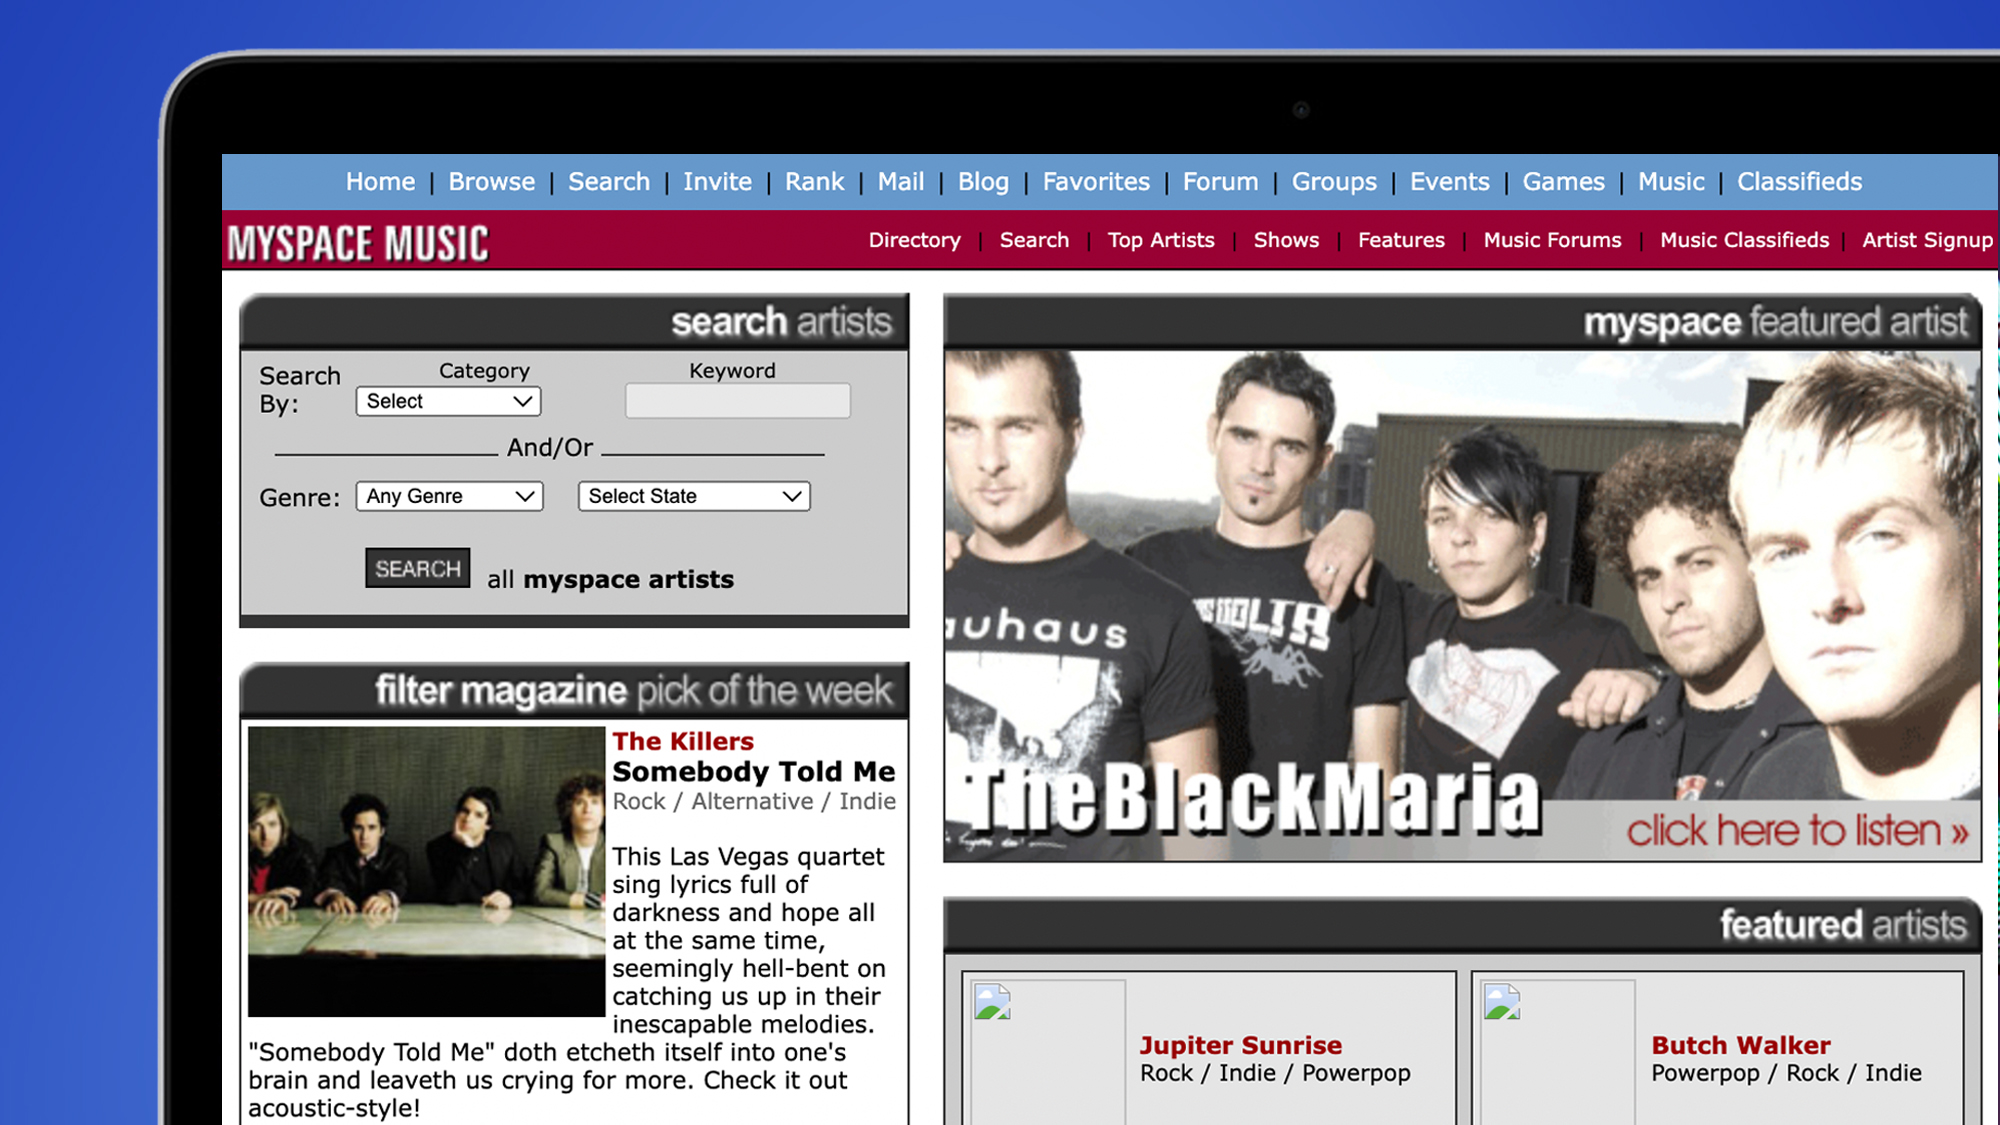 A laptop screen showing MySpace in its early days